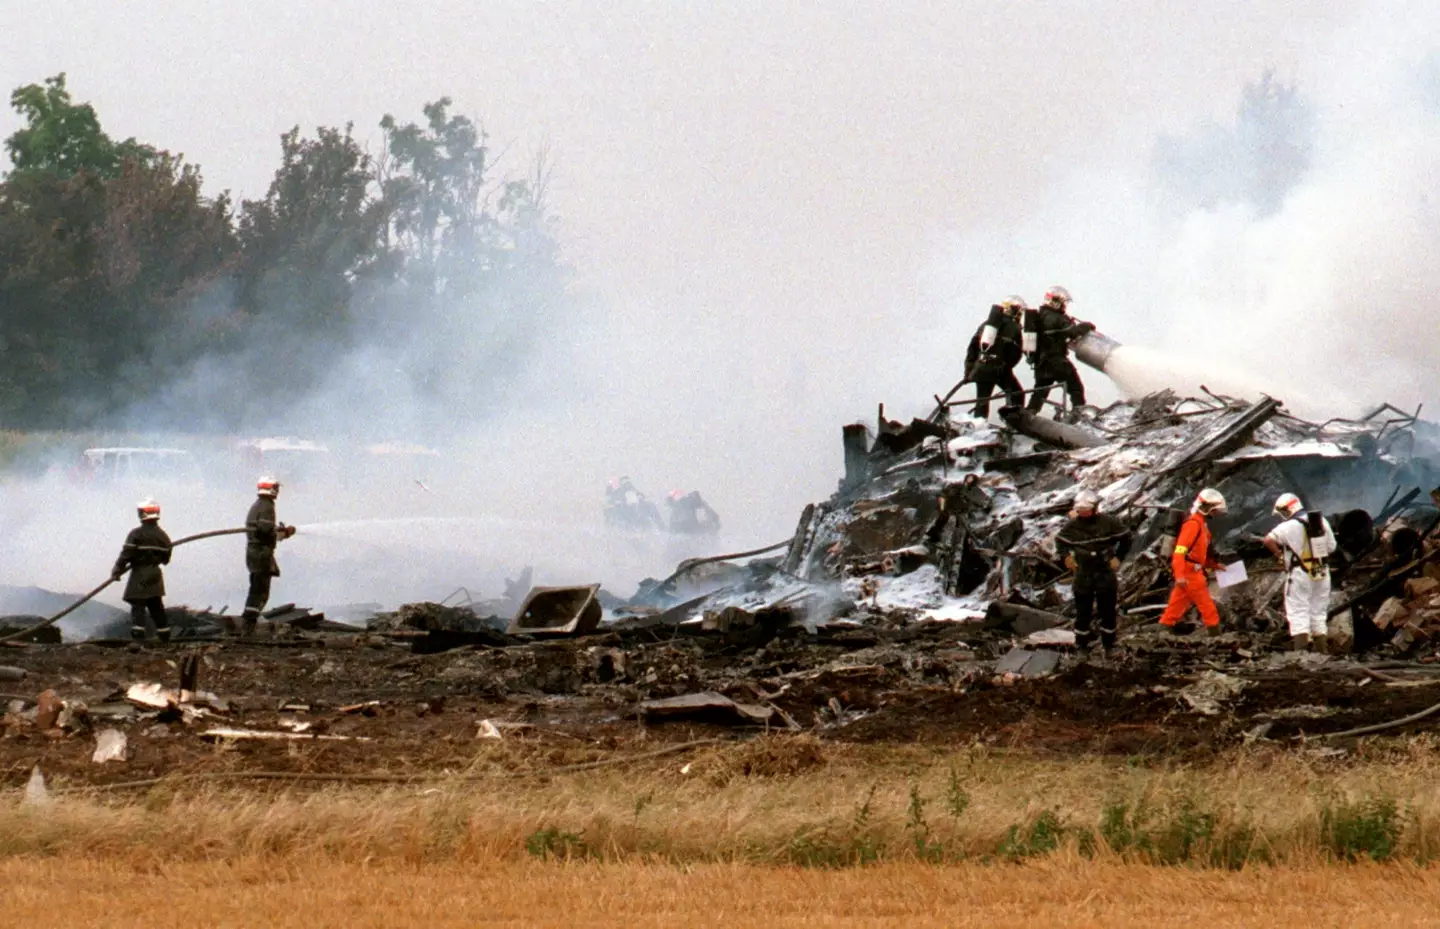 The flight killed all 109 people on board as well as four people on the ground.